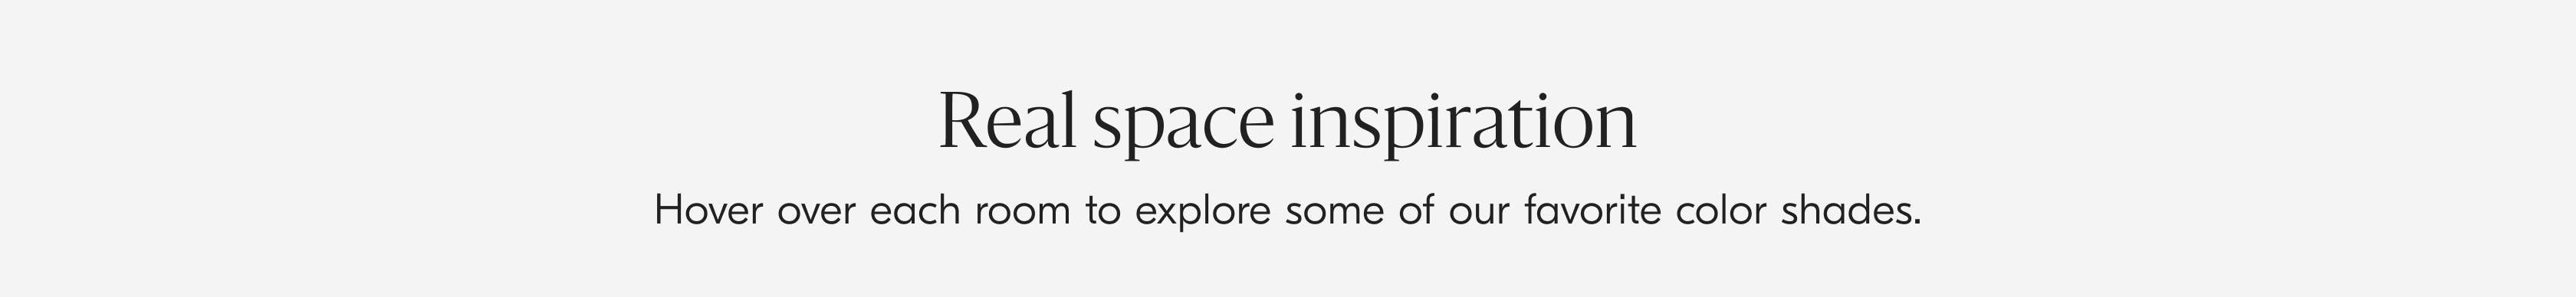 Real space inspiration